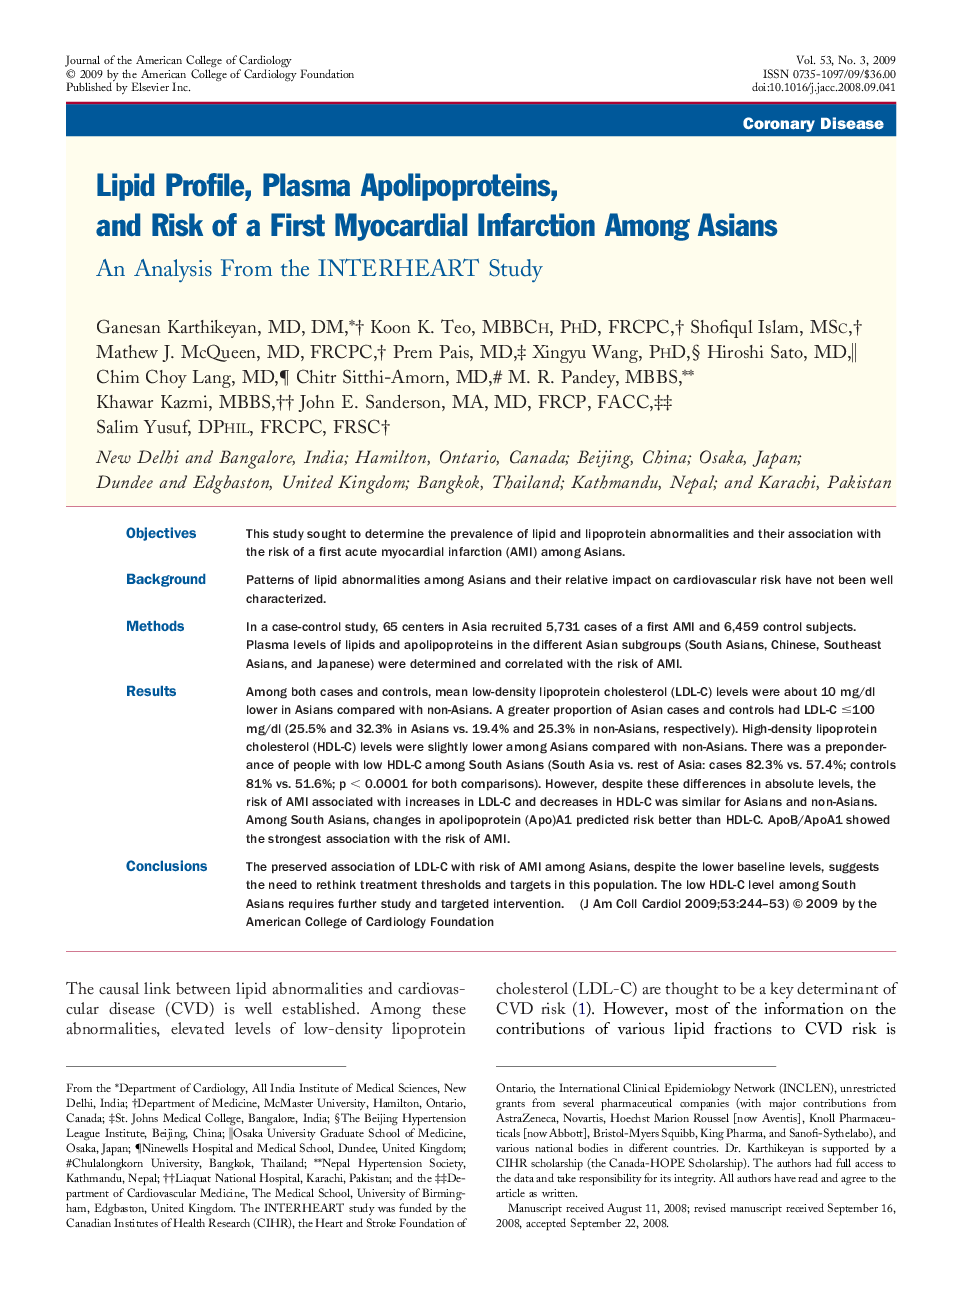 Lipid Profile, Plasma Apolipoproteins, and Risk of a First Myocardial Infarction Among Asians : An Analysis From the INTERHEART Study